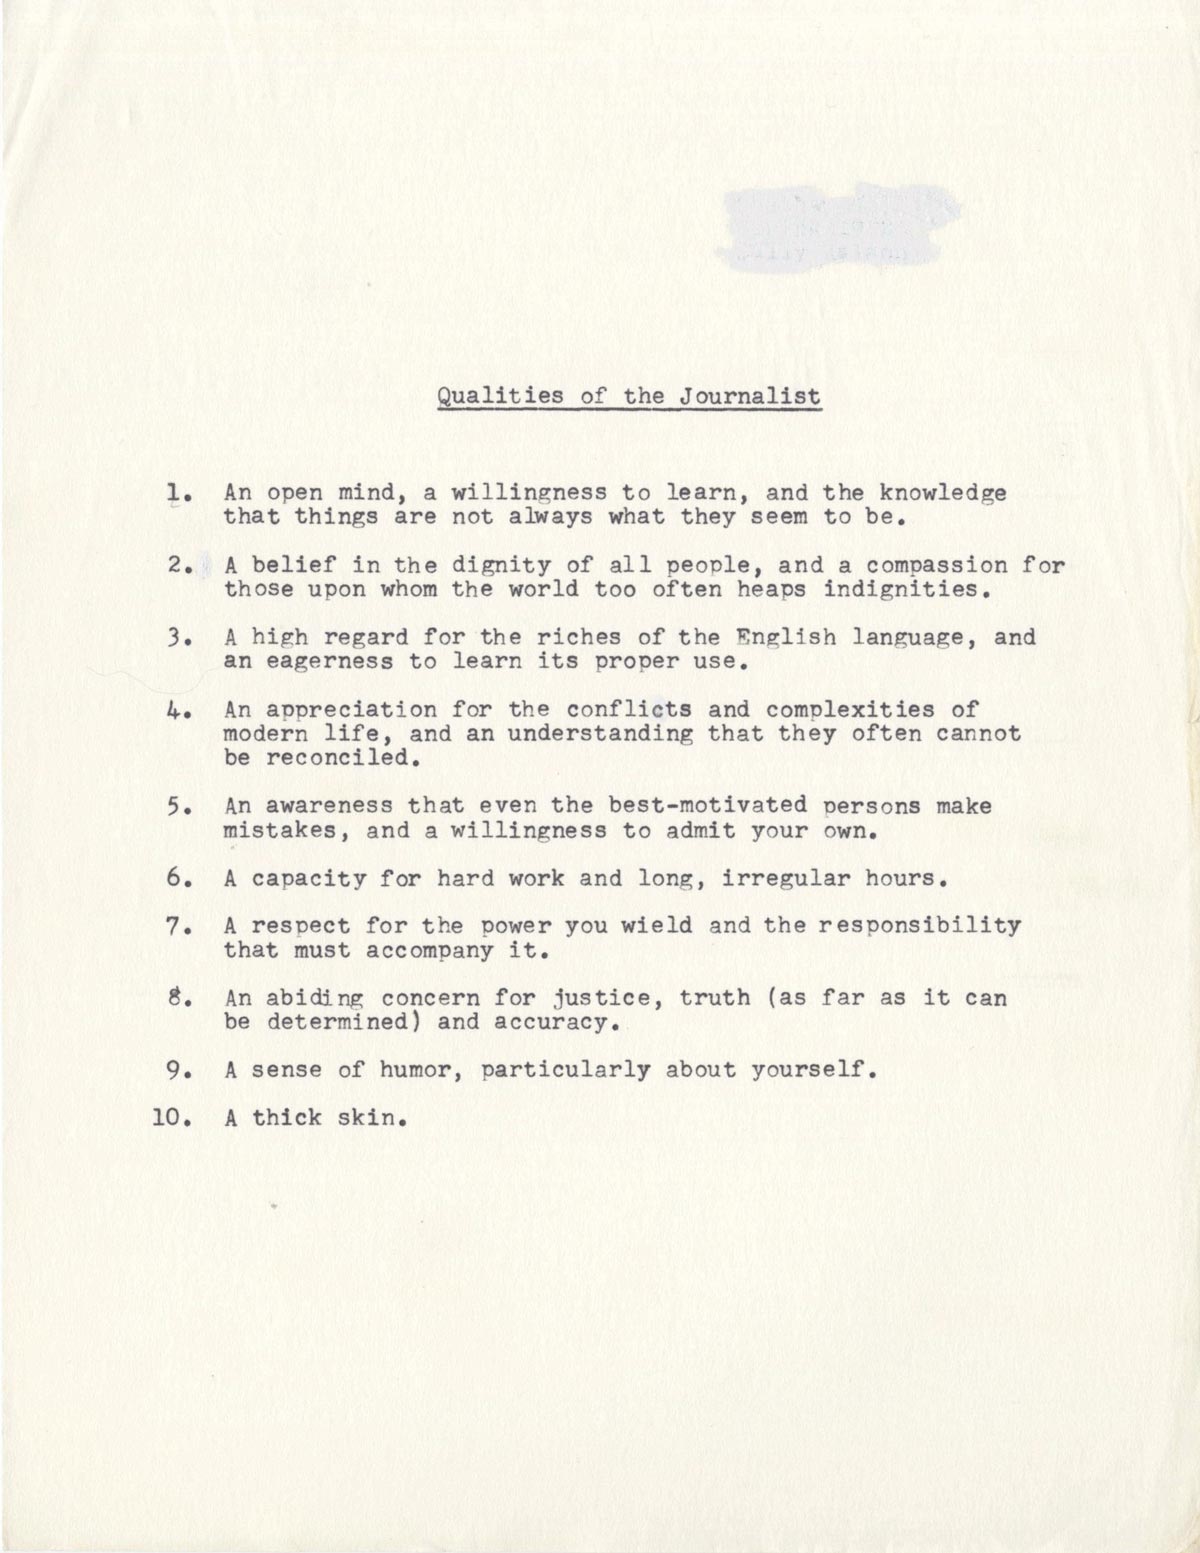 Sally Kalson developed her own curriculum materials, including this list, for the journalism class she taught at Chatham University.